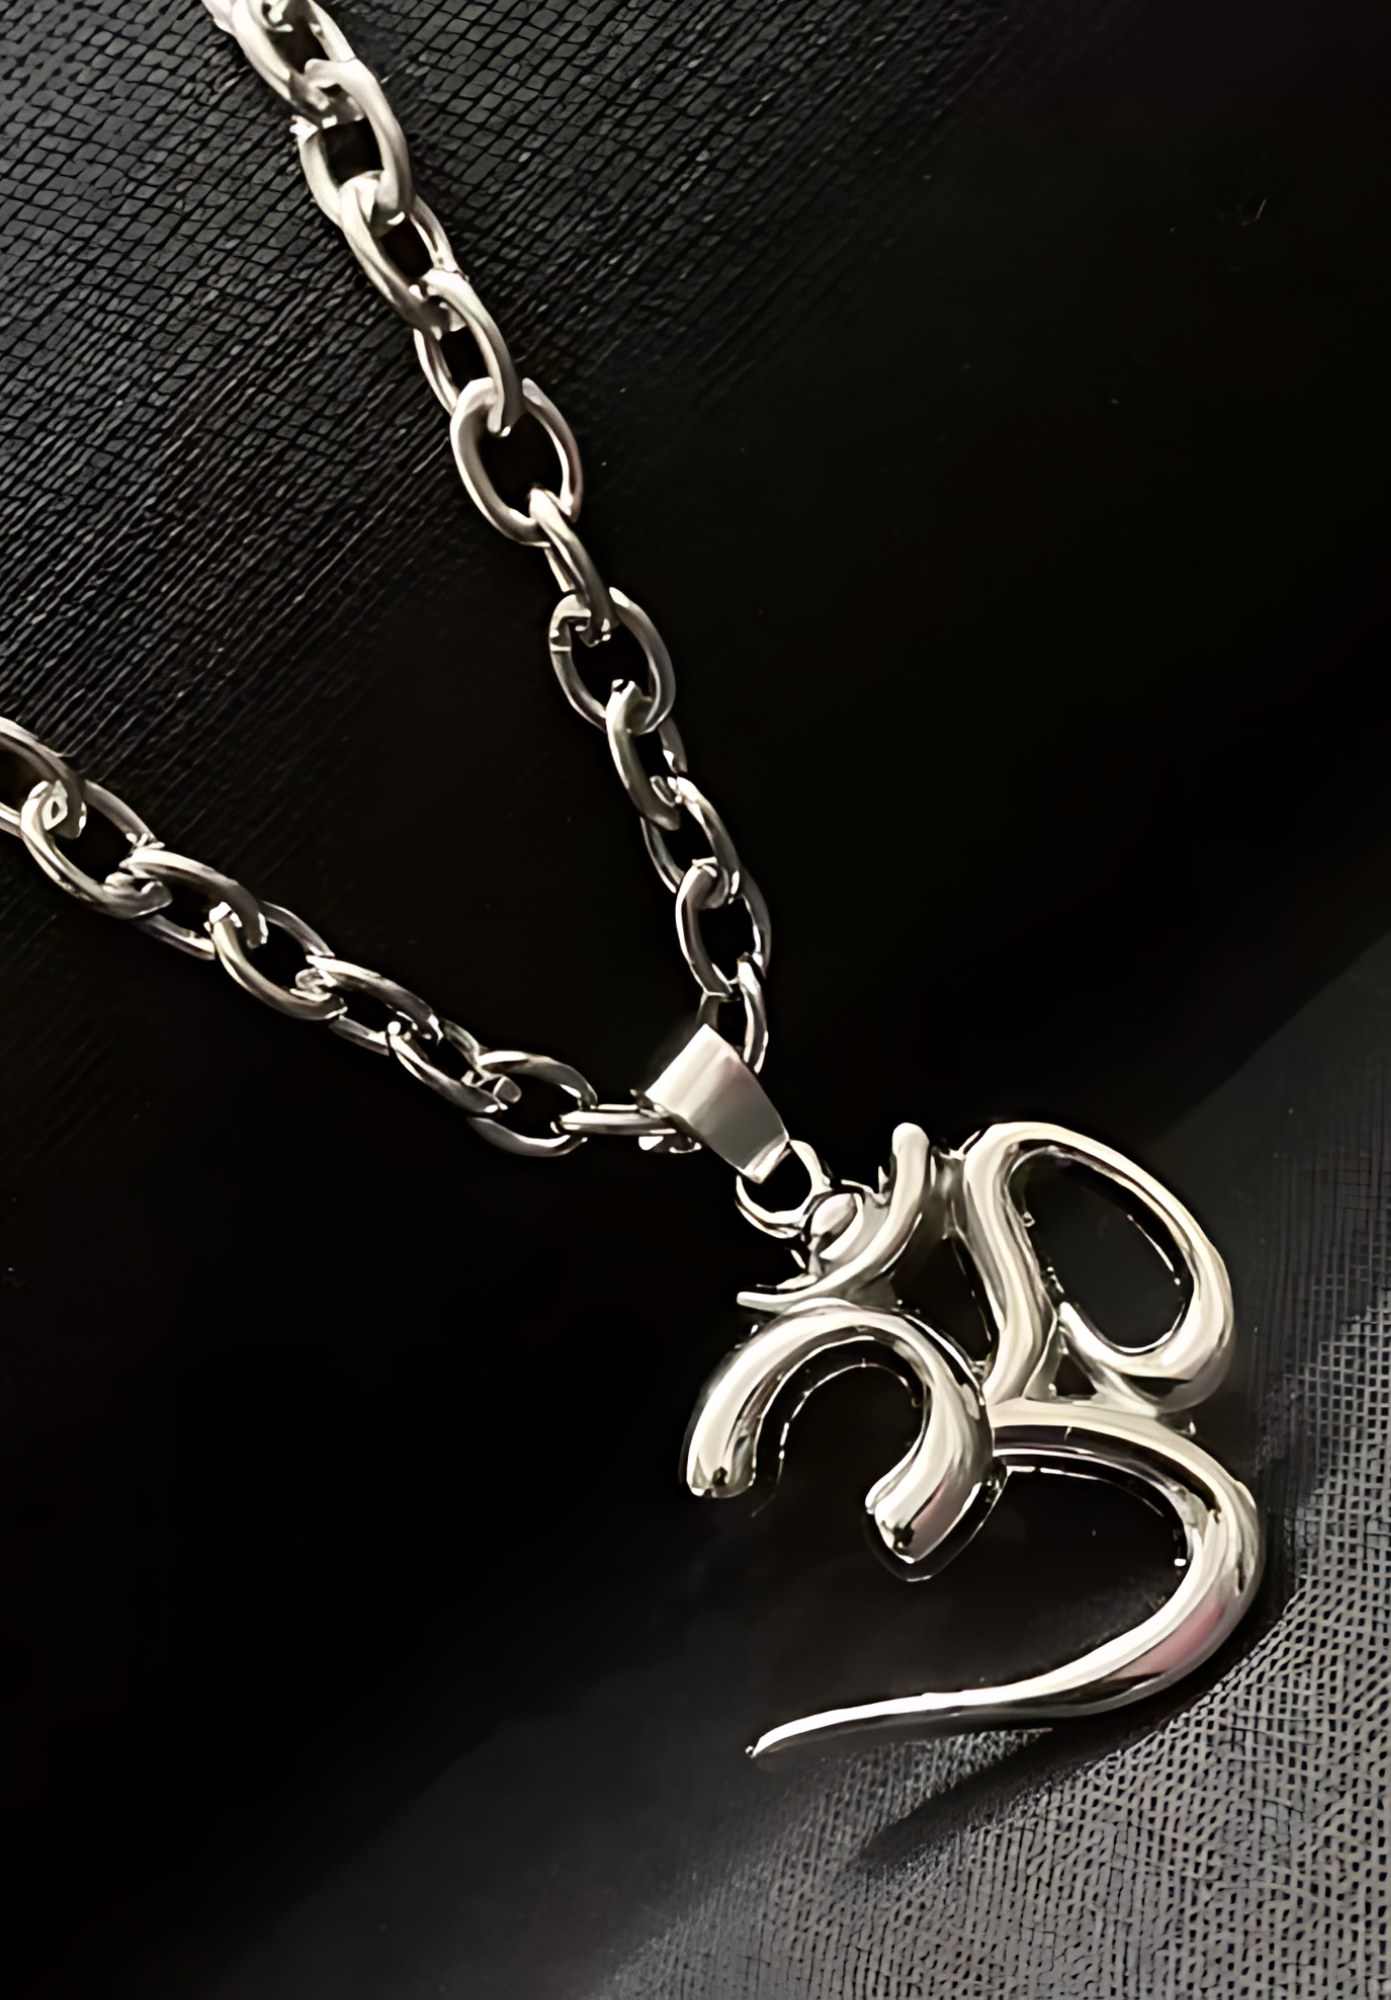 Om Pendant for Neck and Wrist